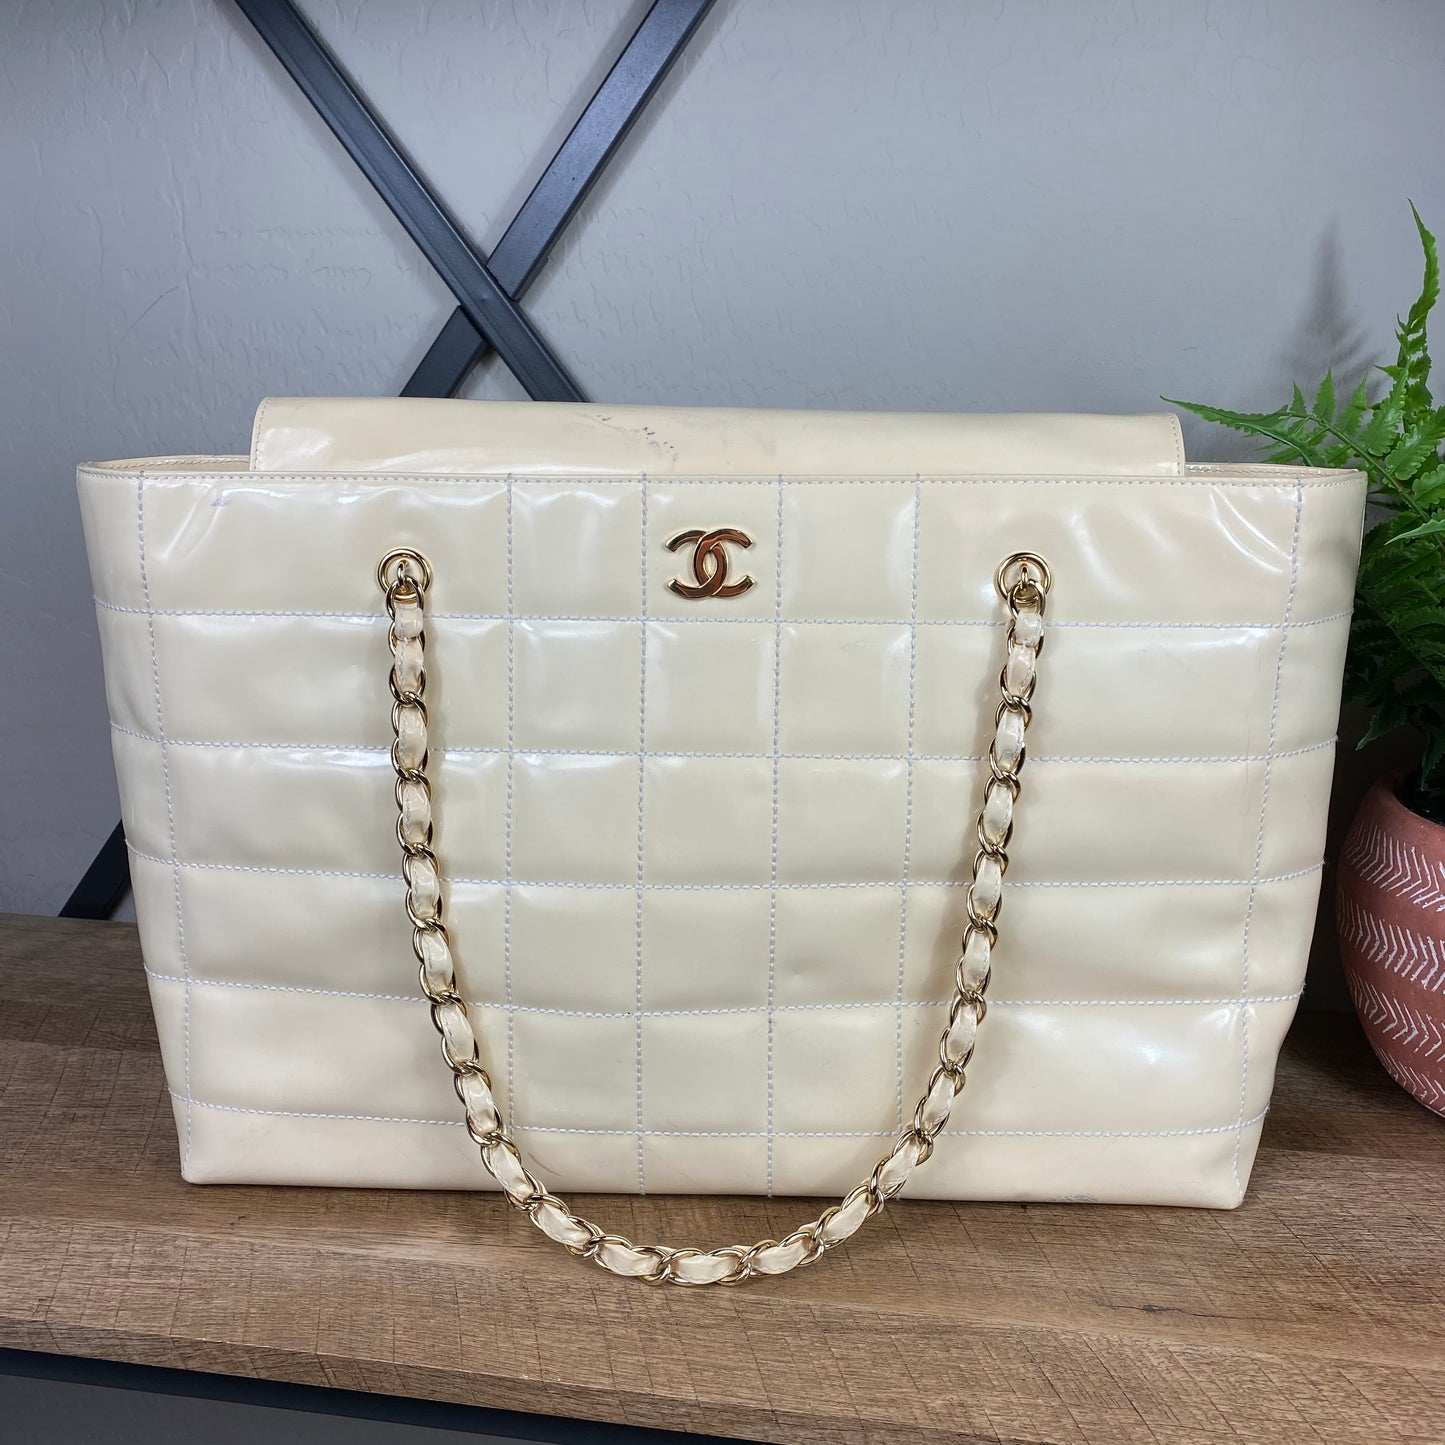 Chanel Chocolate Bar Patent Leather Tote